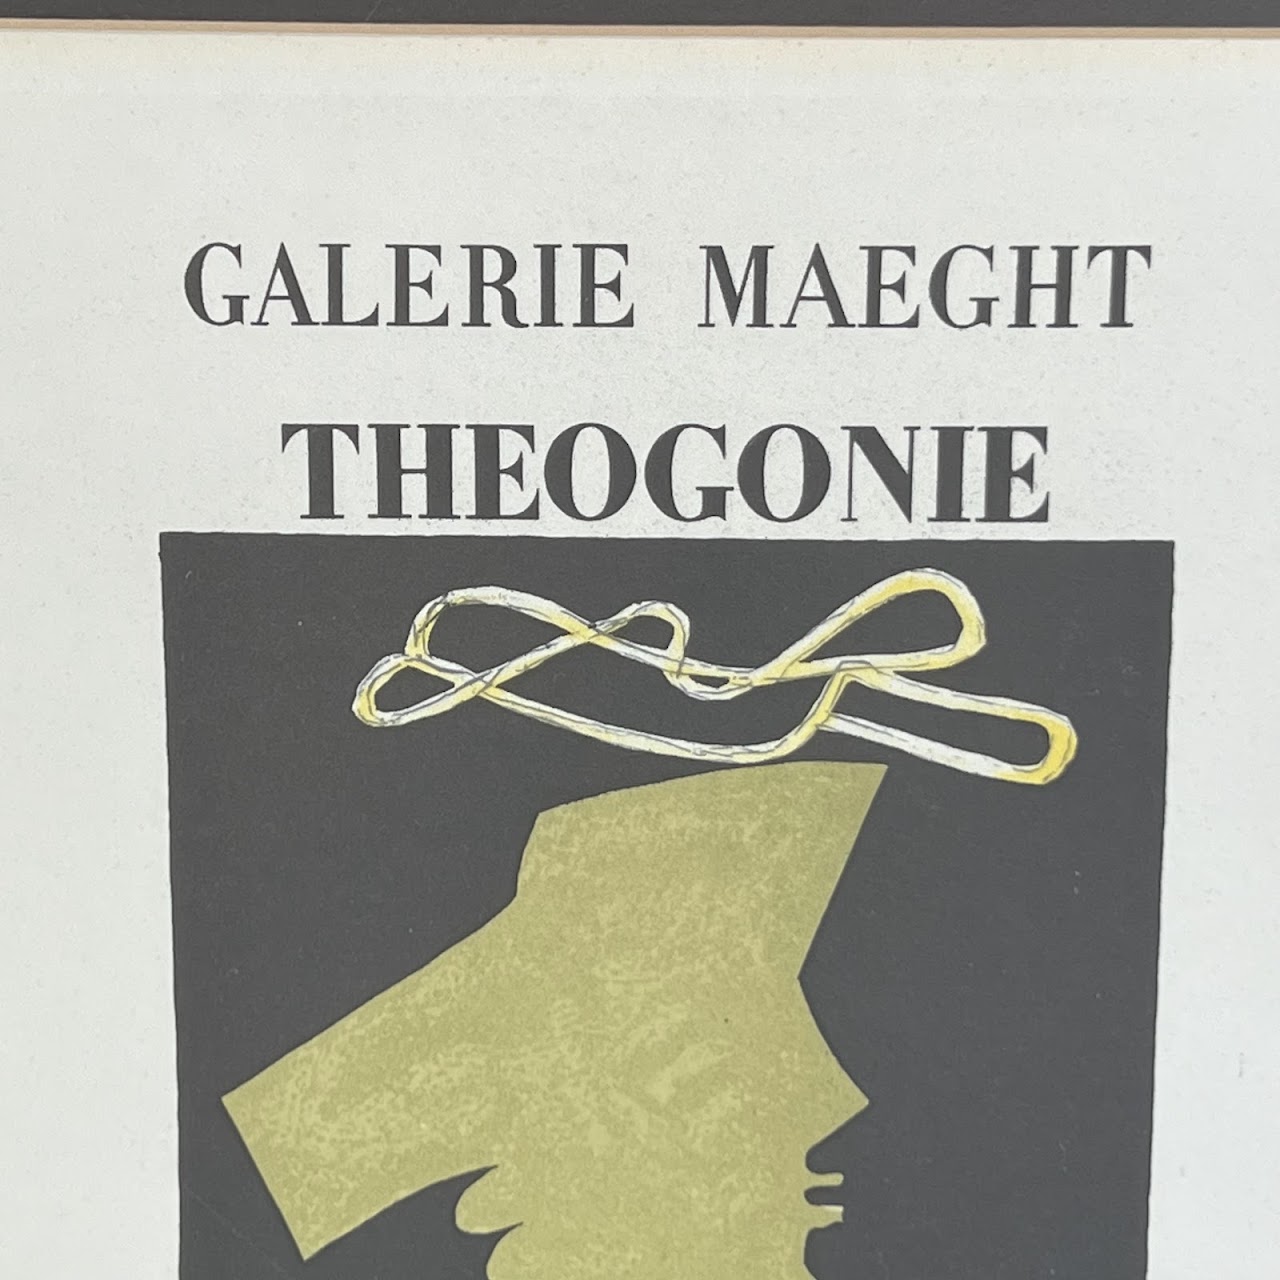 Georges Braque 'Théogonie' Galerie Maeght Mourlot Lithograph Bookplate, 1959